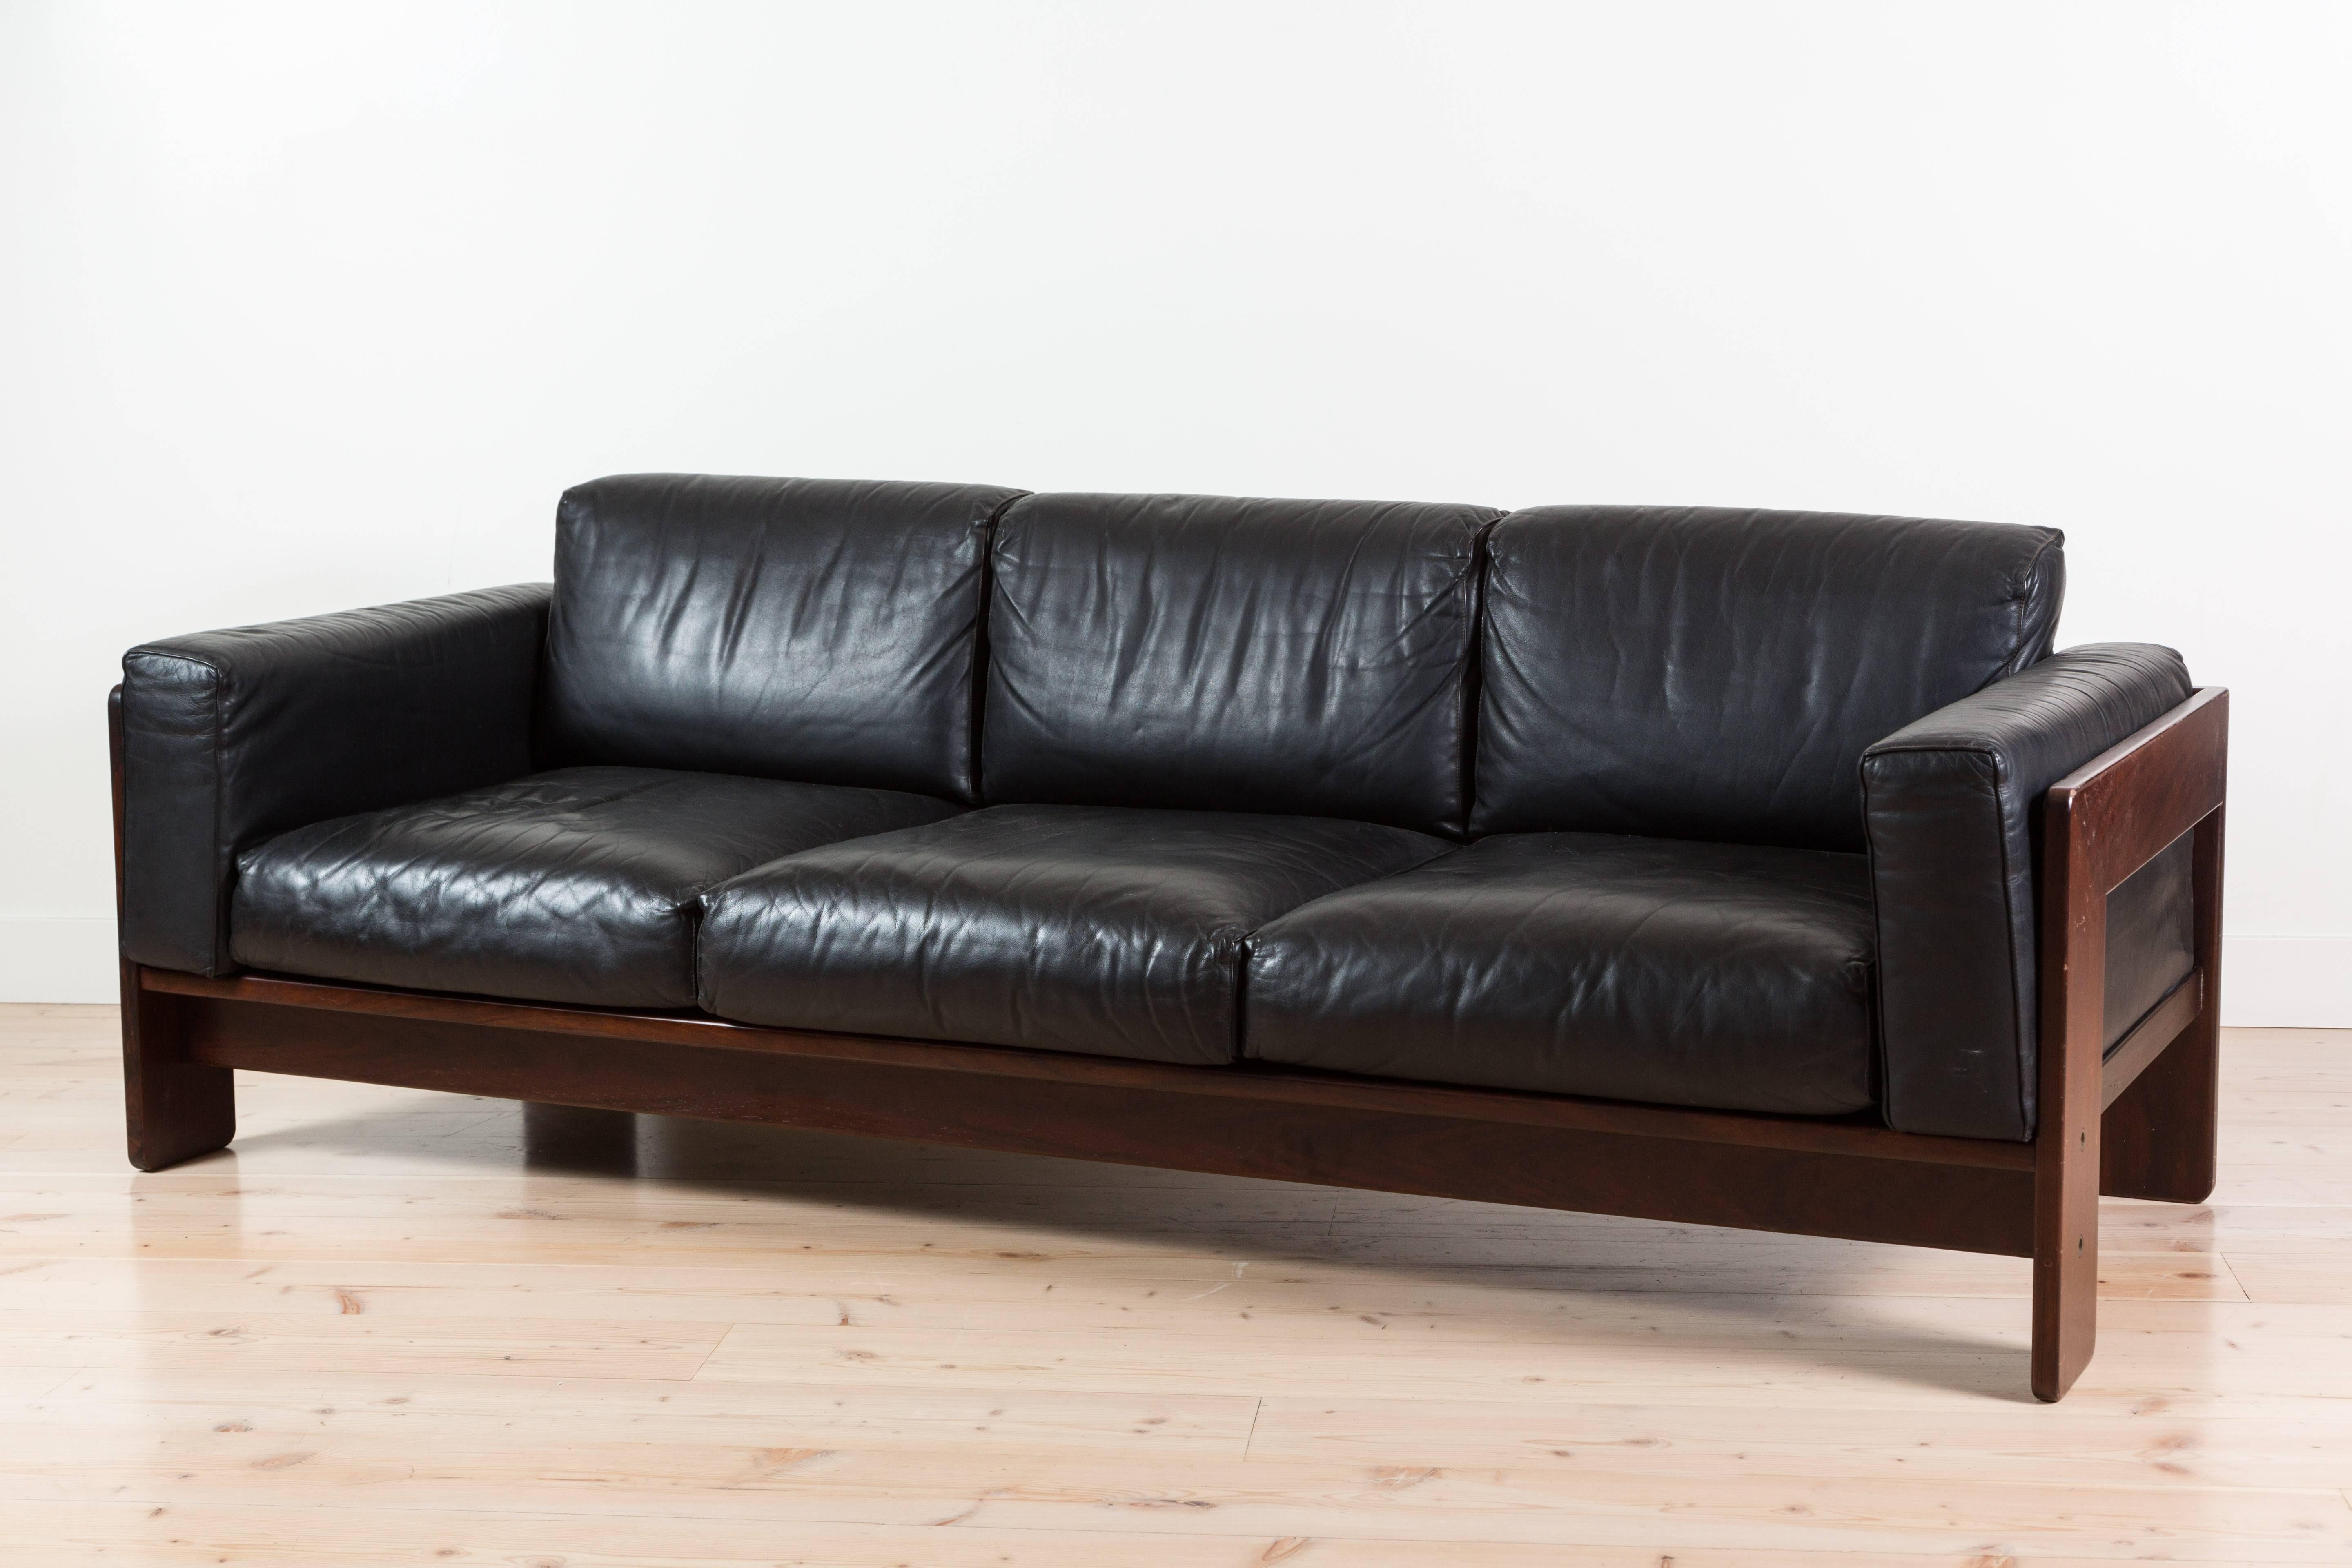 Bastiano sofa by Tobia Scarpa for Knoll. Original black leather cushions. Rosewood frame. Classic styling. 